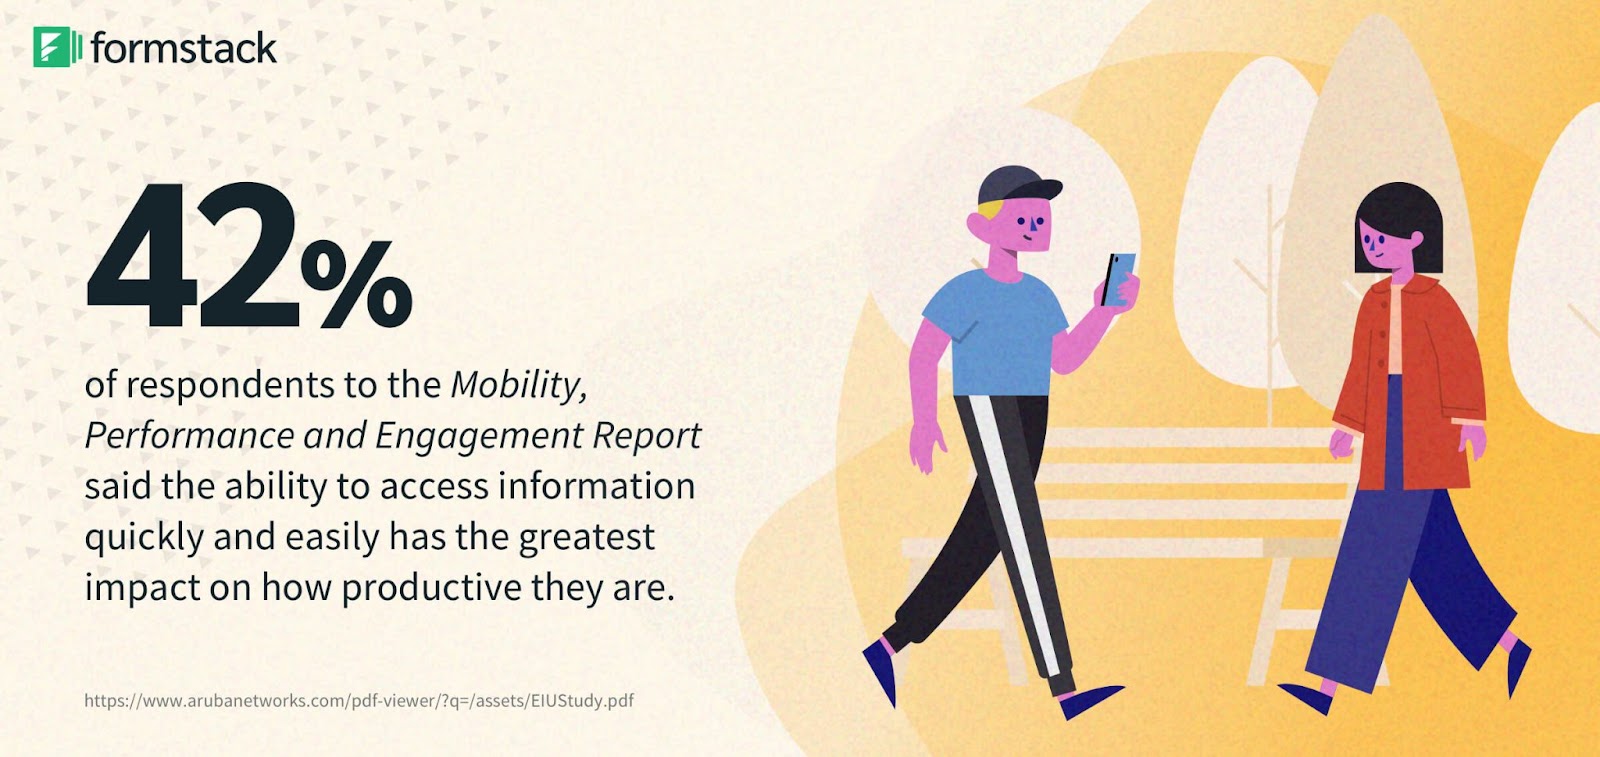 Illustration from formstack shows two people walking towards each other, one looking at their phone and other looking ahead. "42% of respondents to the Mobility performance and engagement report" said the ability to access information quickly and easily has the greatest impact on how productive they are.?